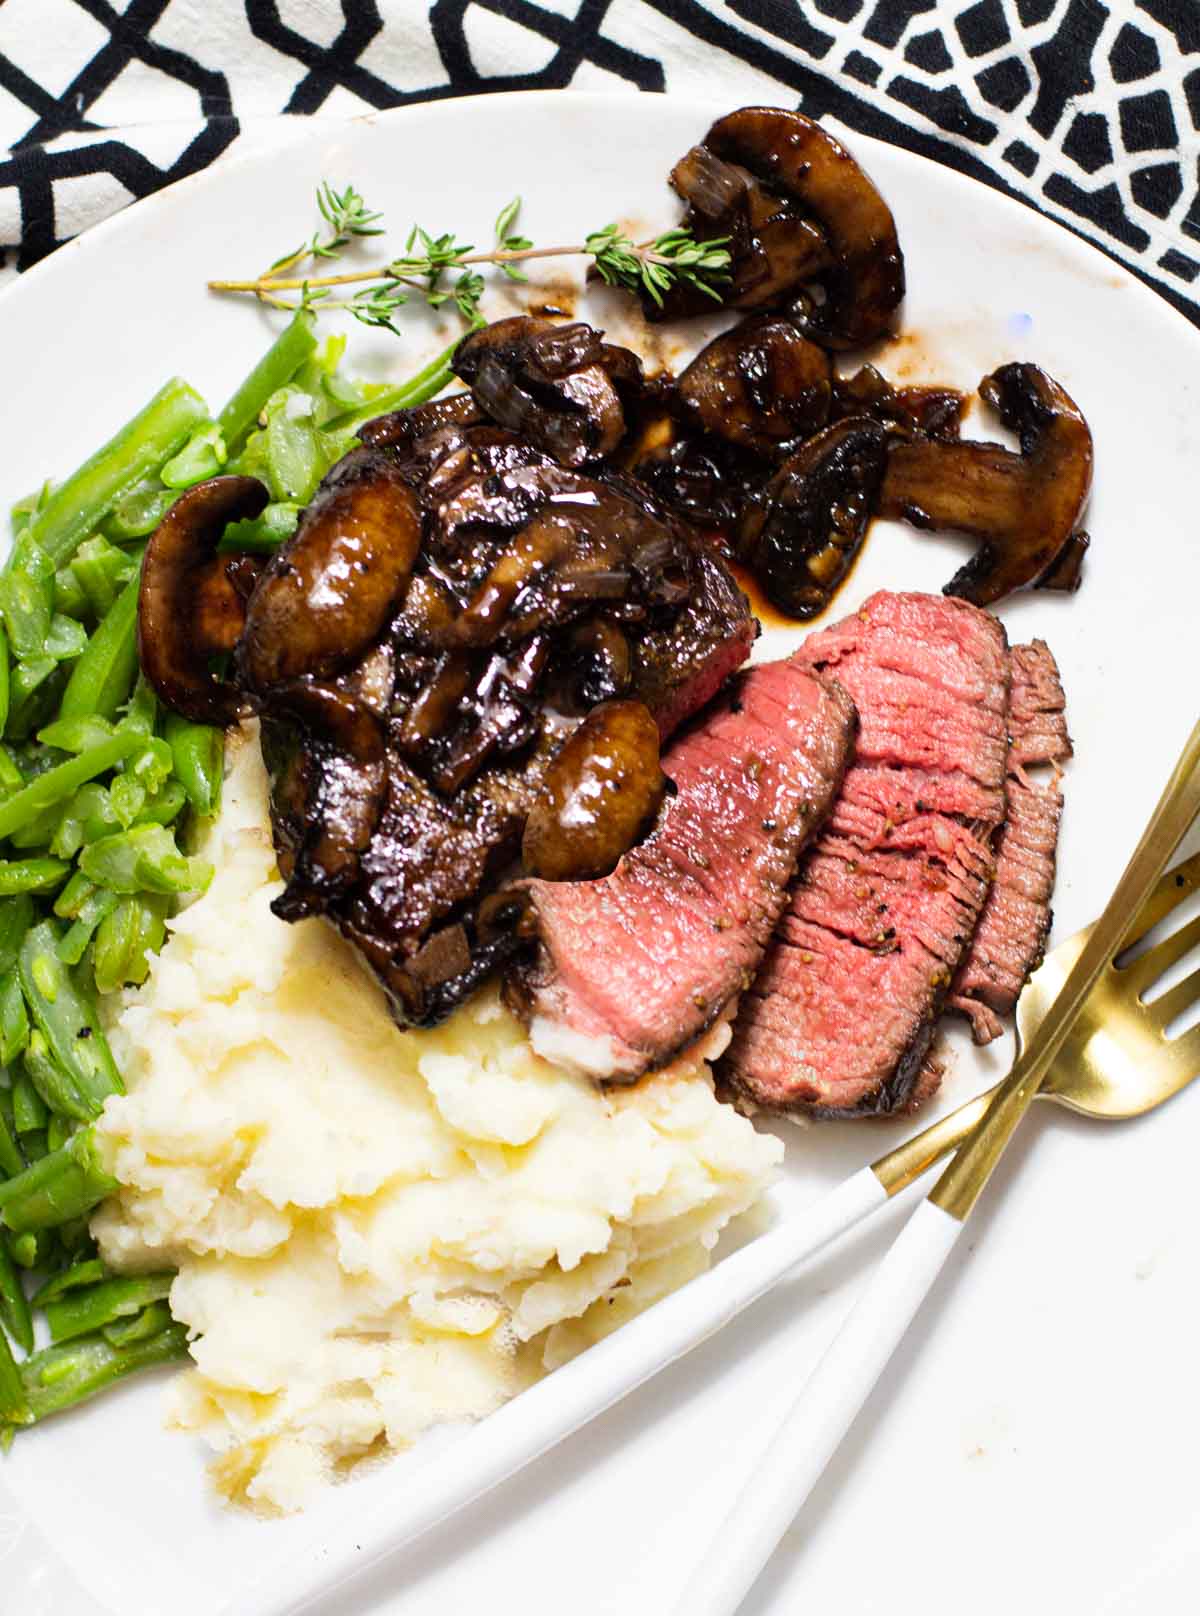 Beef tournados with red wine mushroom sauce served with mashed potatoes and green beans